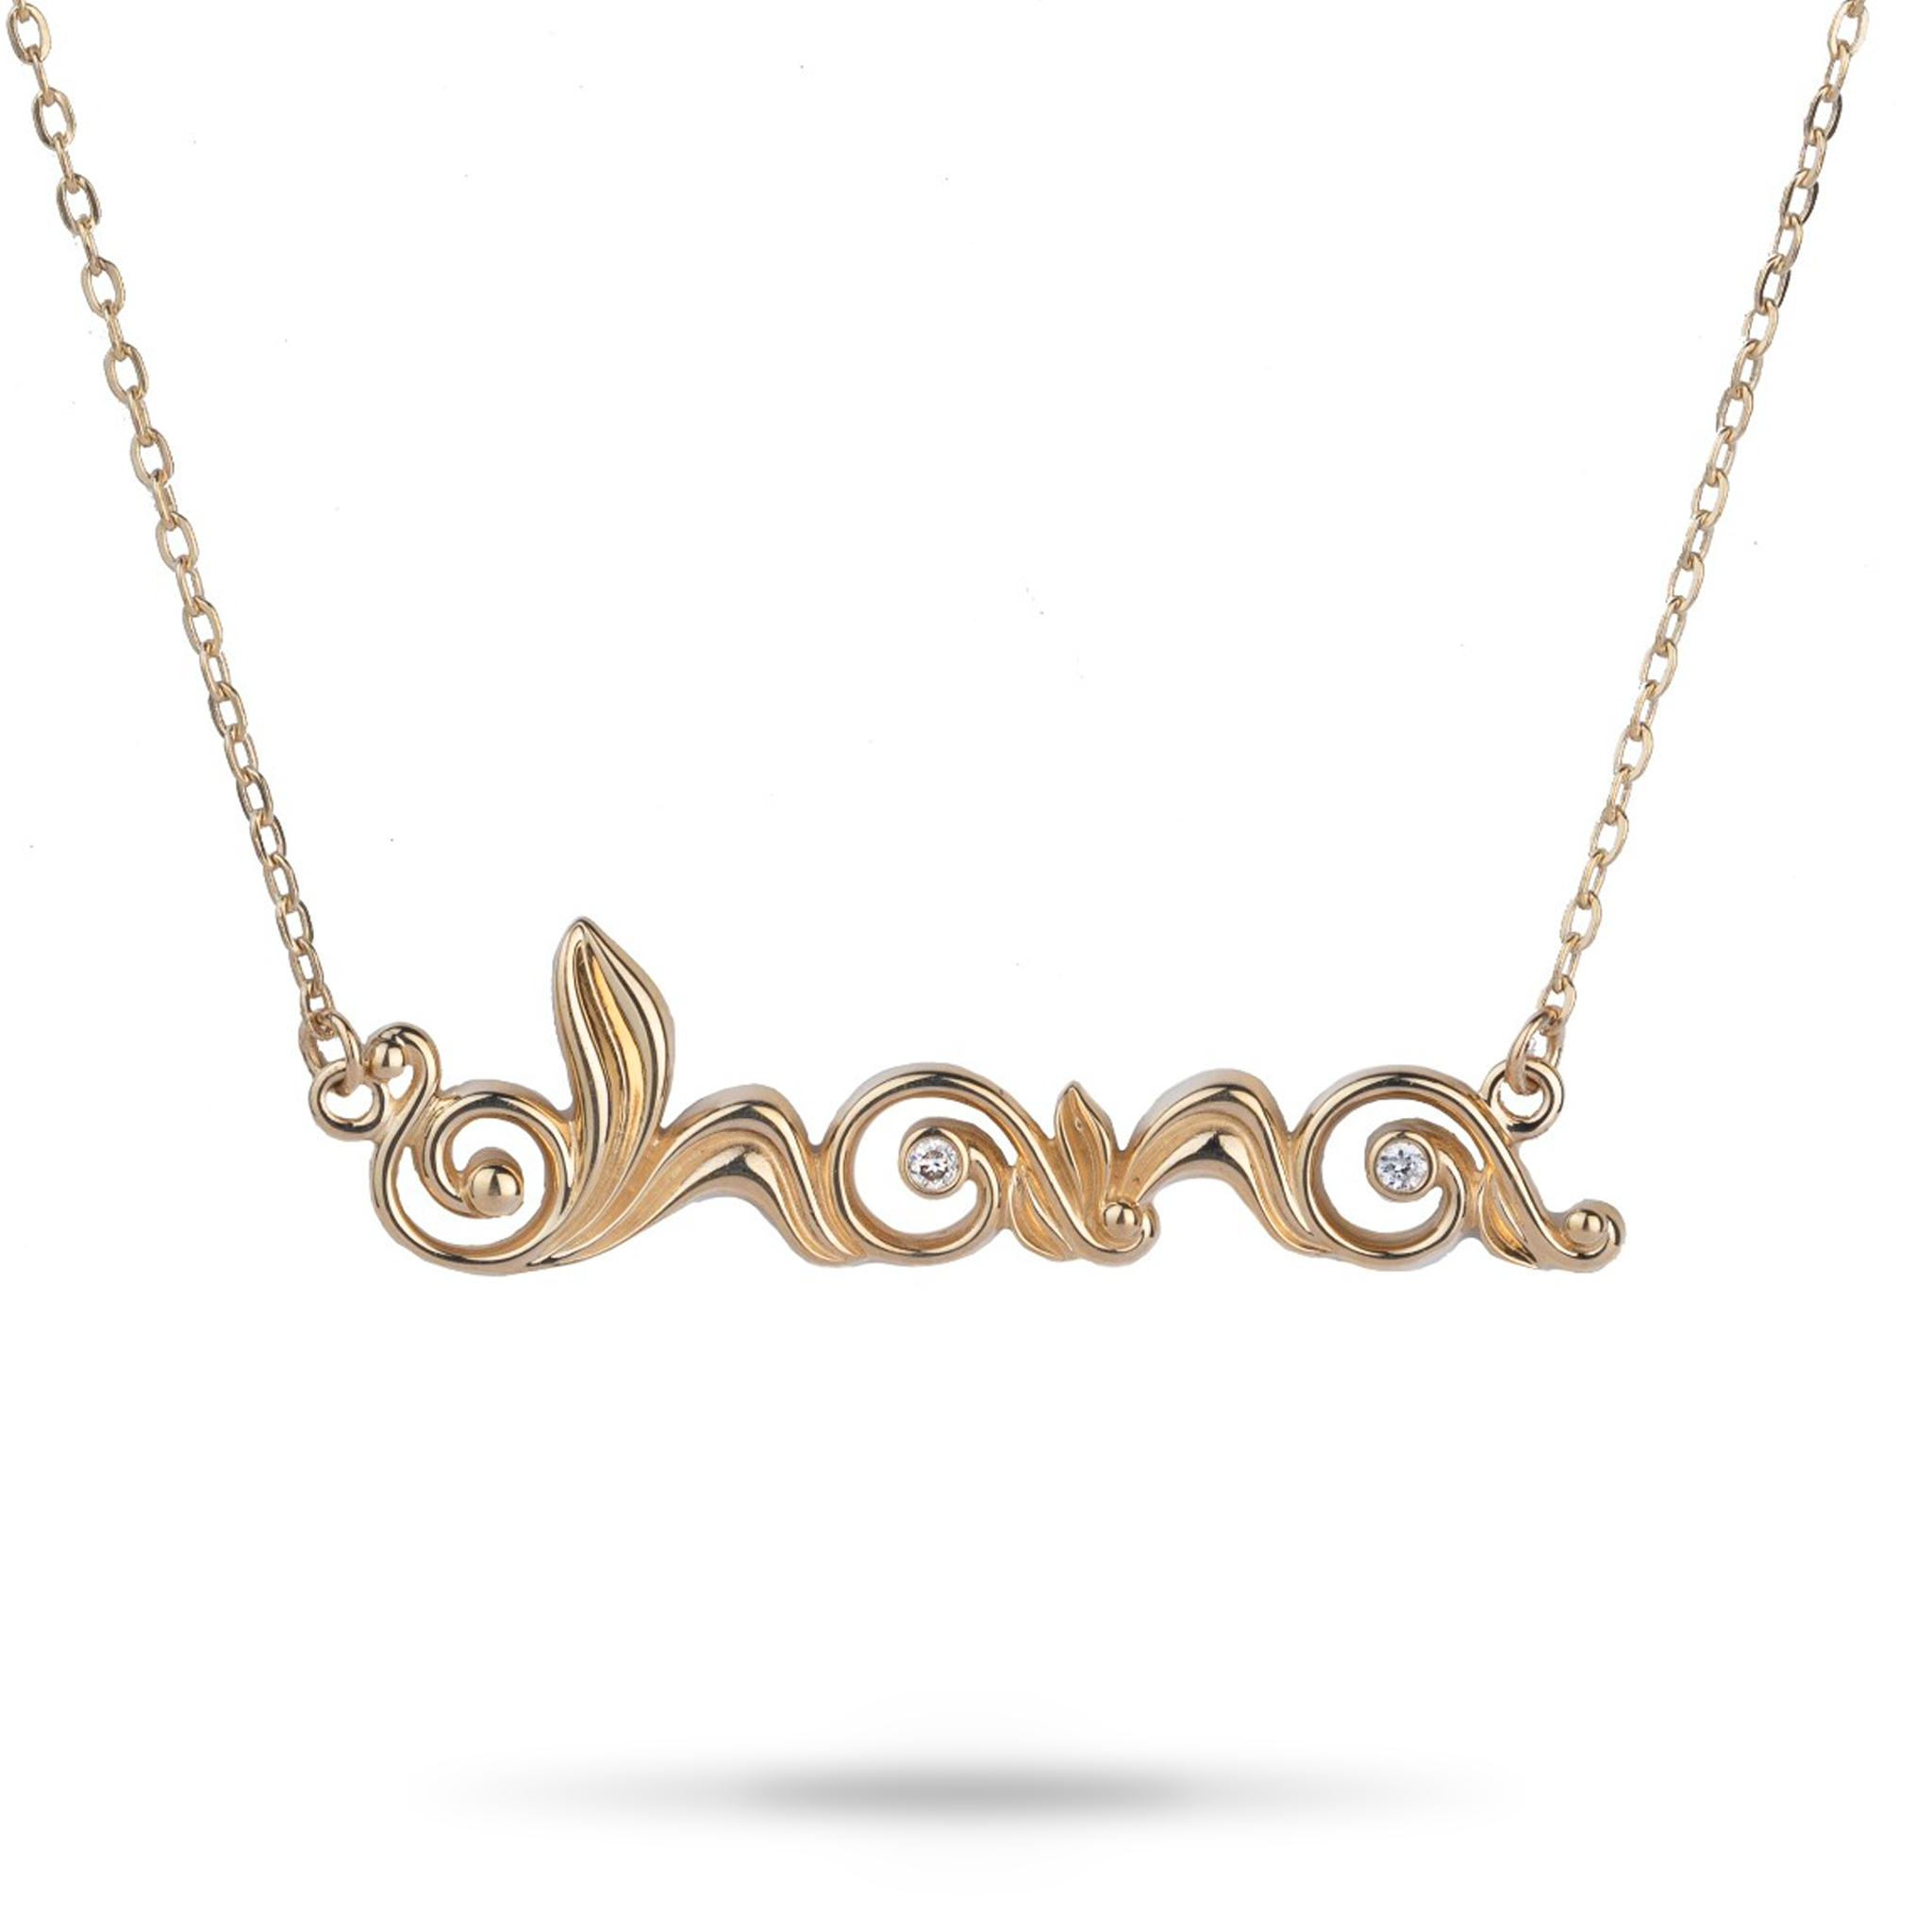 16-18" Adjustable Living Heirloom ʻOhana Necklace in Gold with Diamond